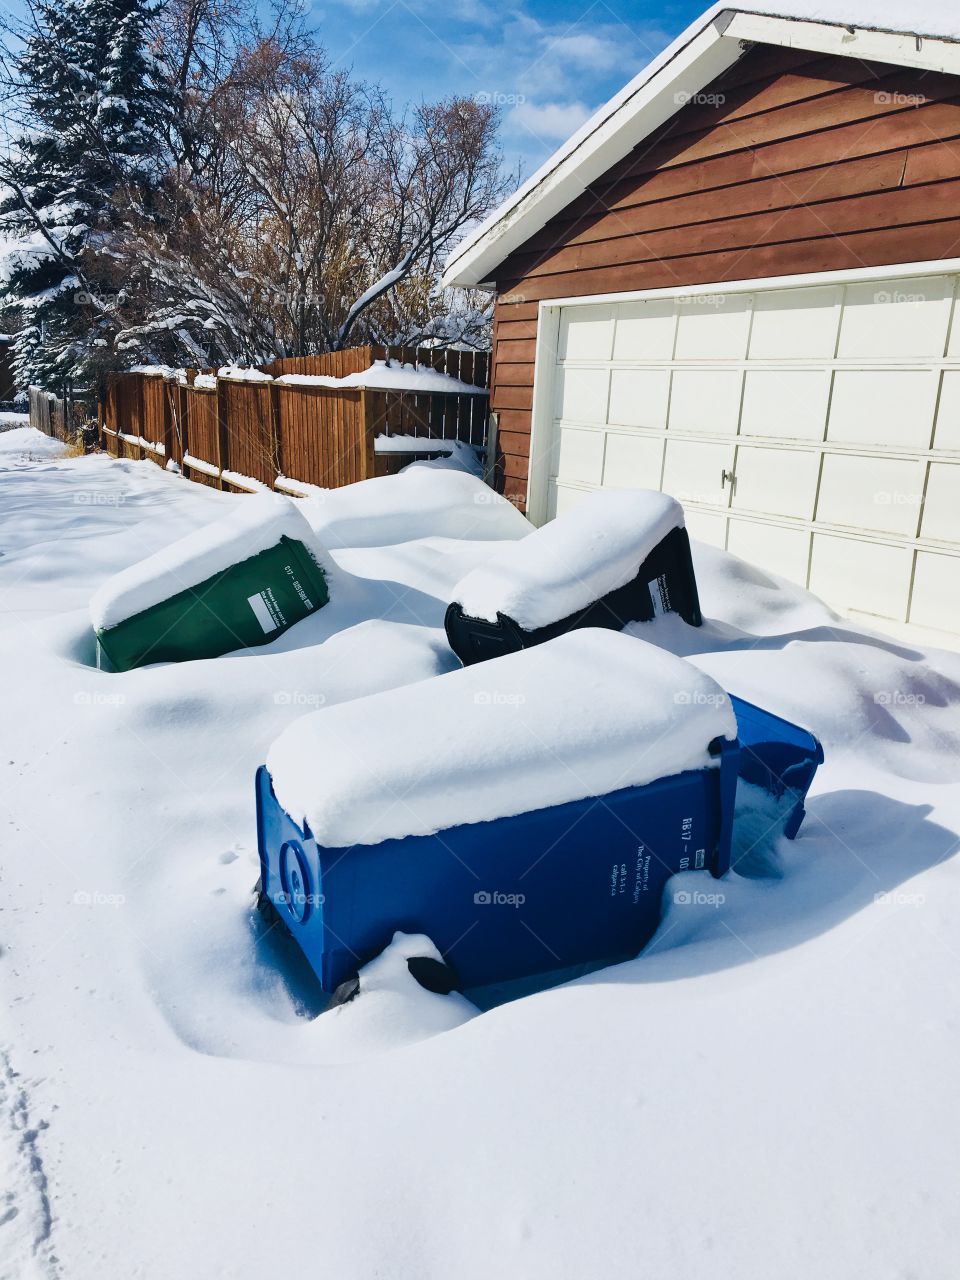 Garbage and recycling containers hidden under the snow outside the house.